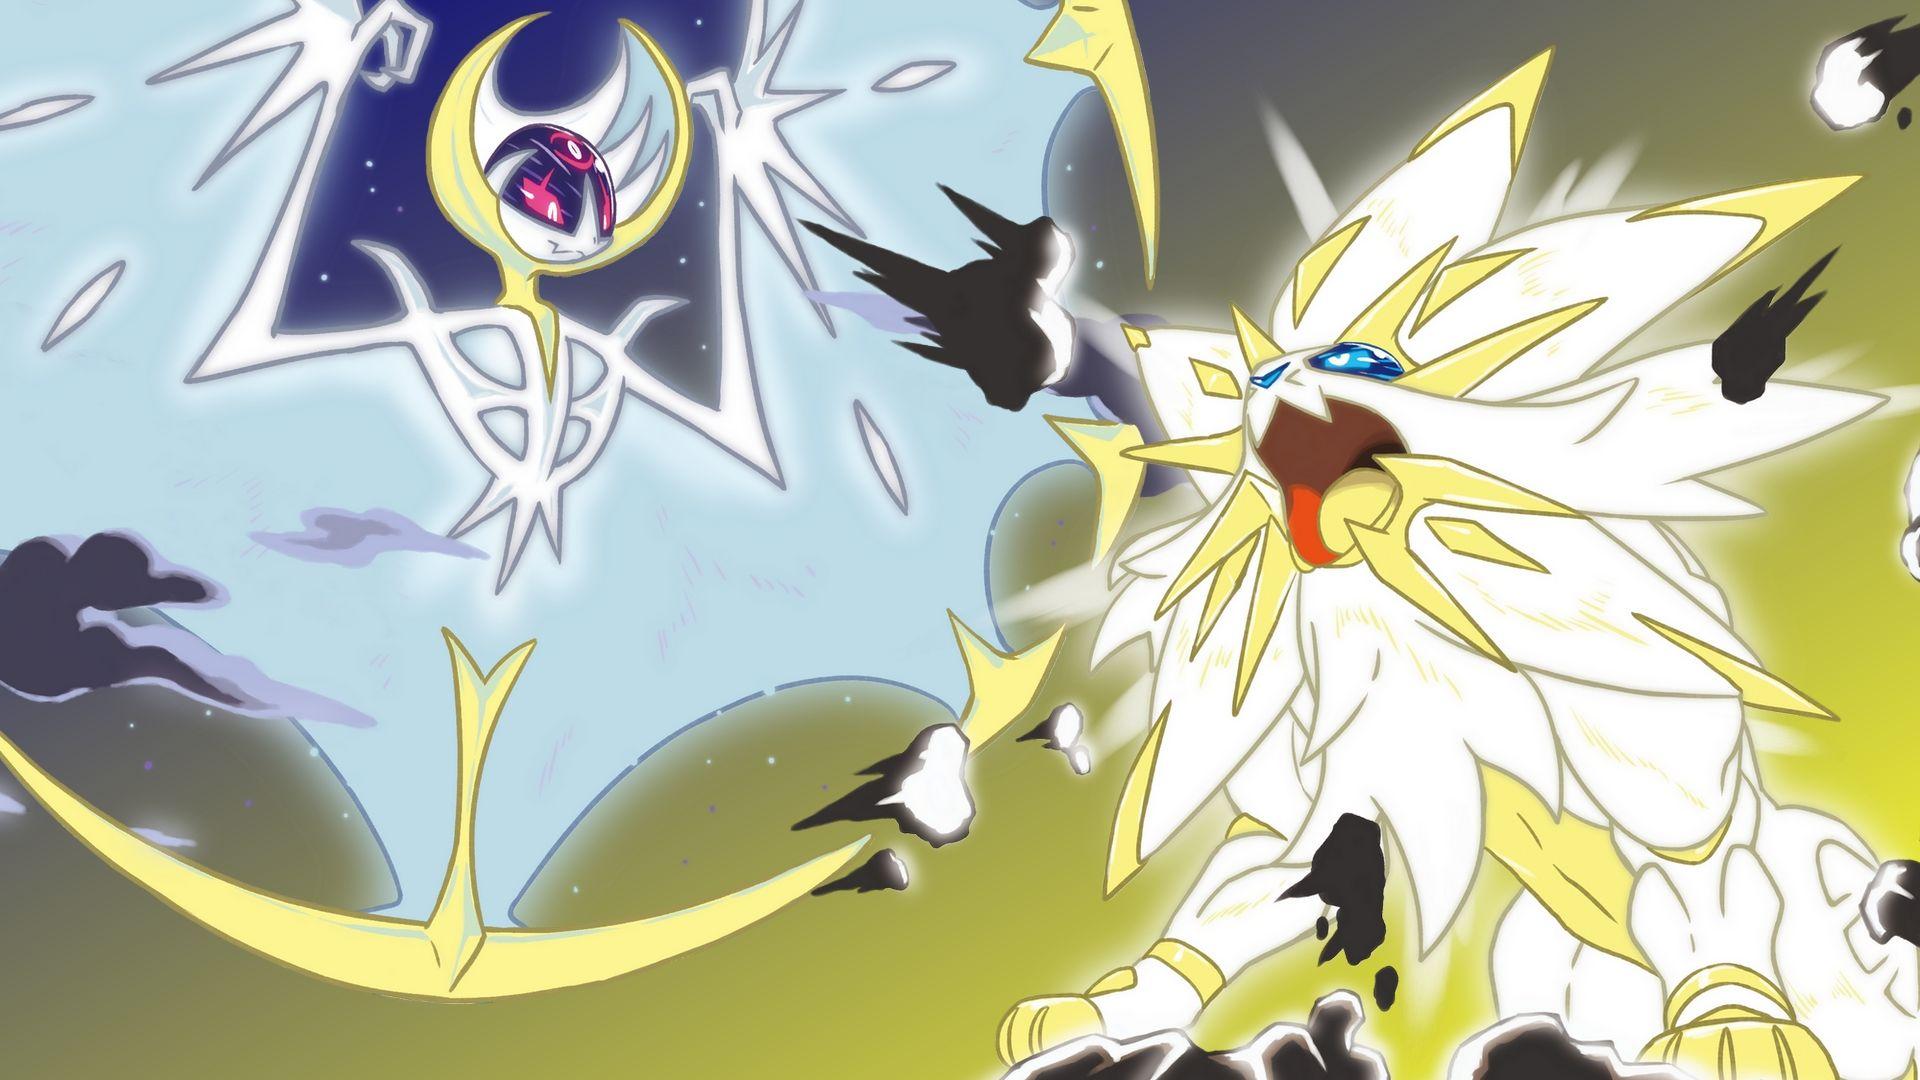 Pokémon immagini Solgaleo and Lunala HD wallpapers and backgrounds.